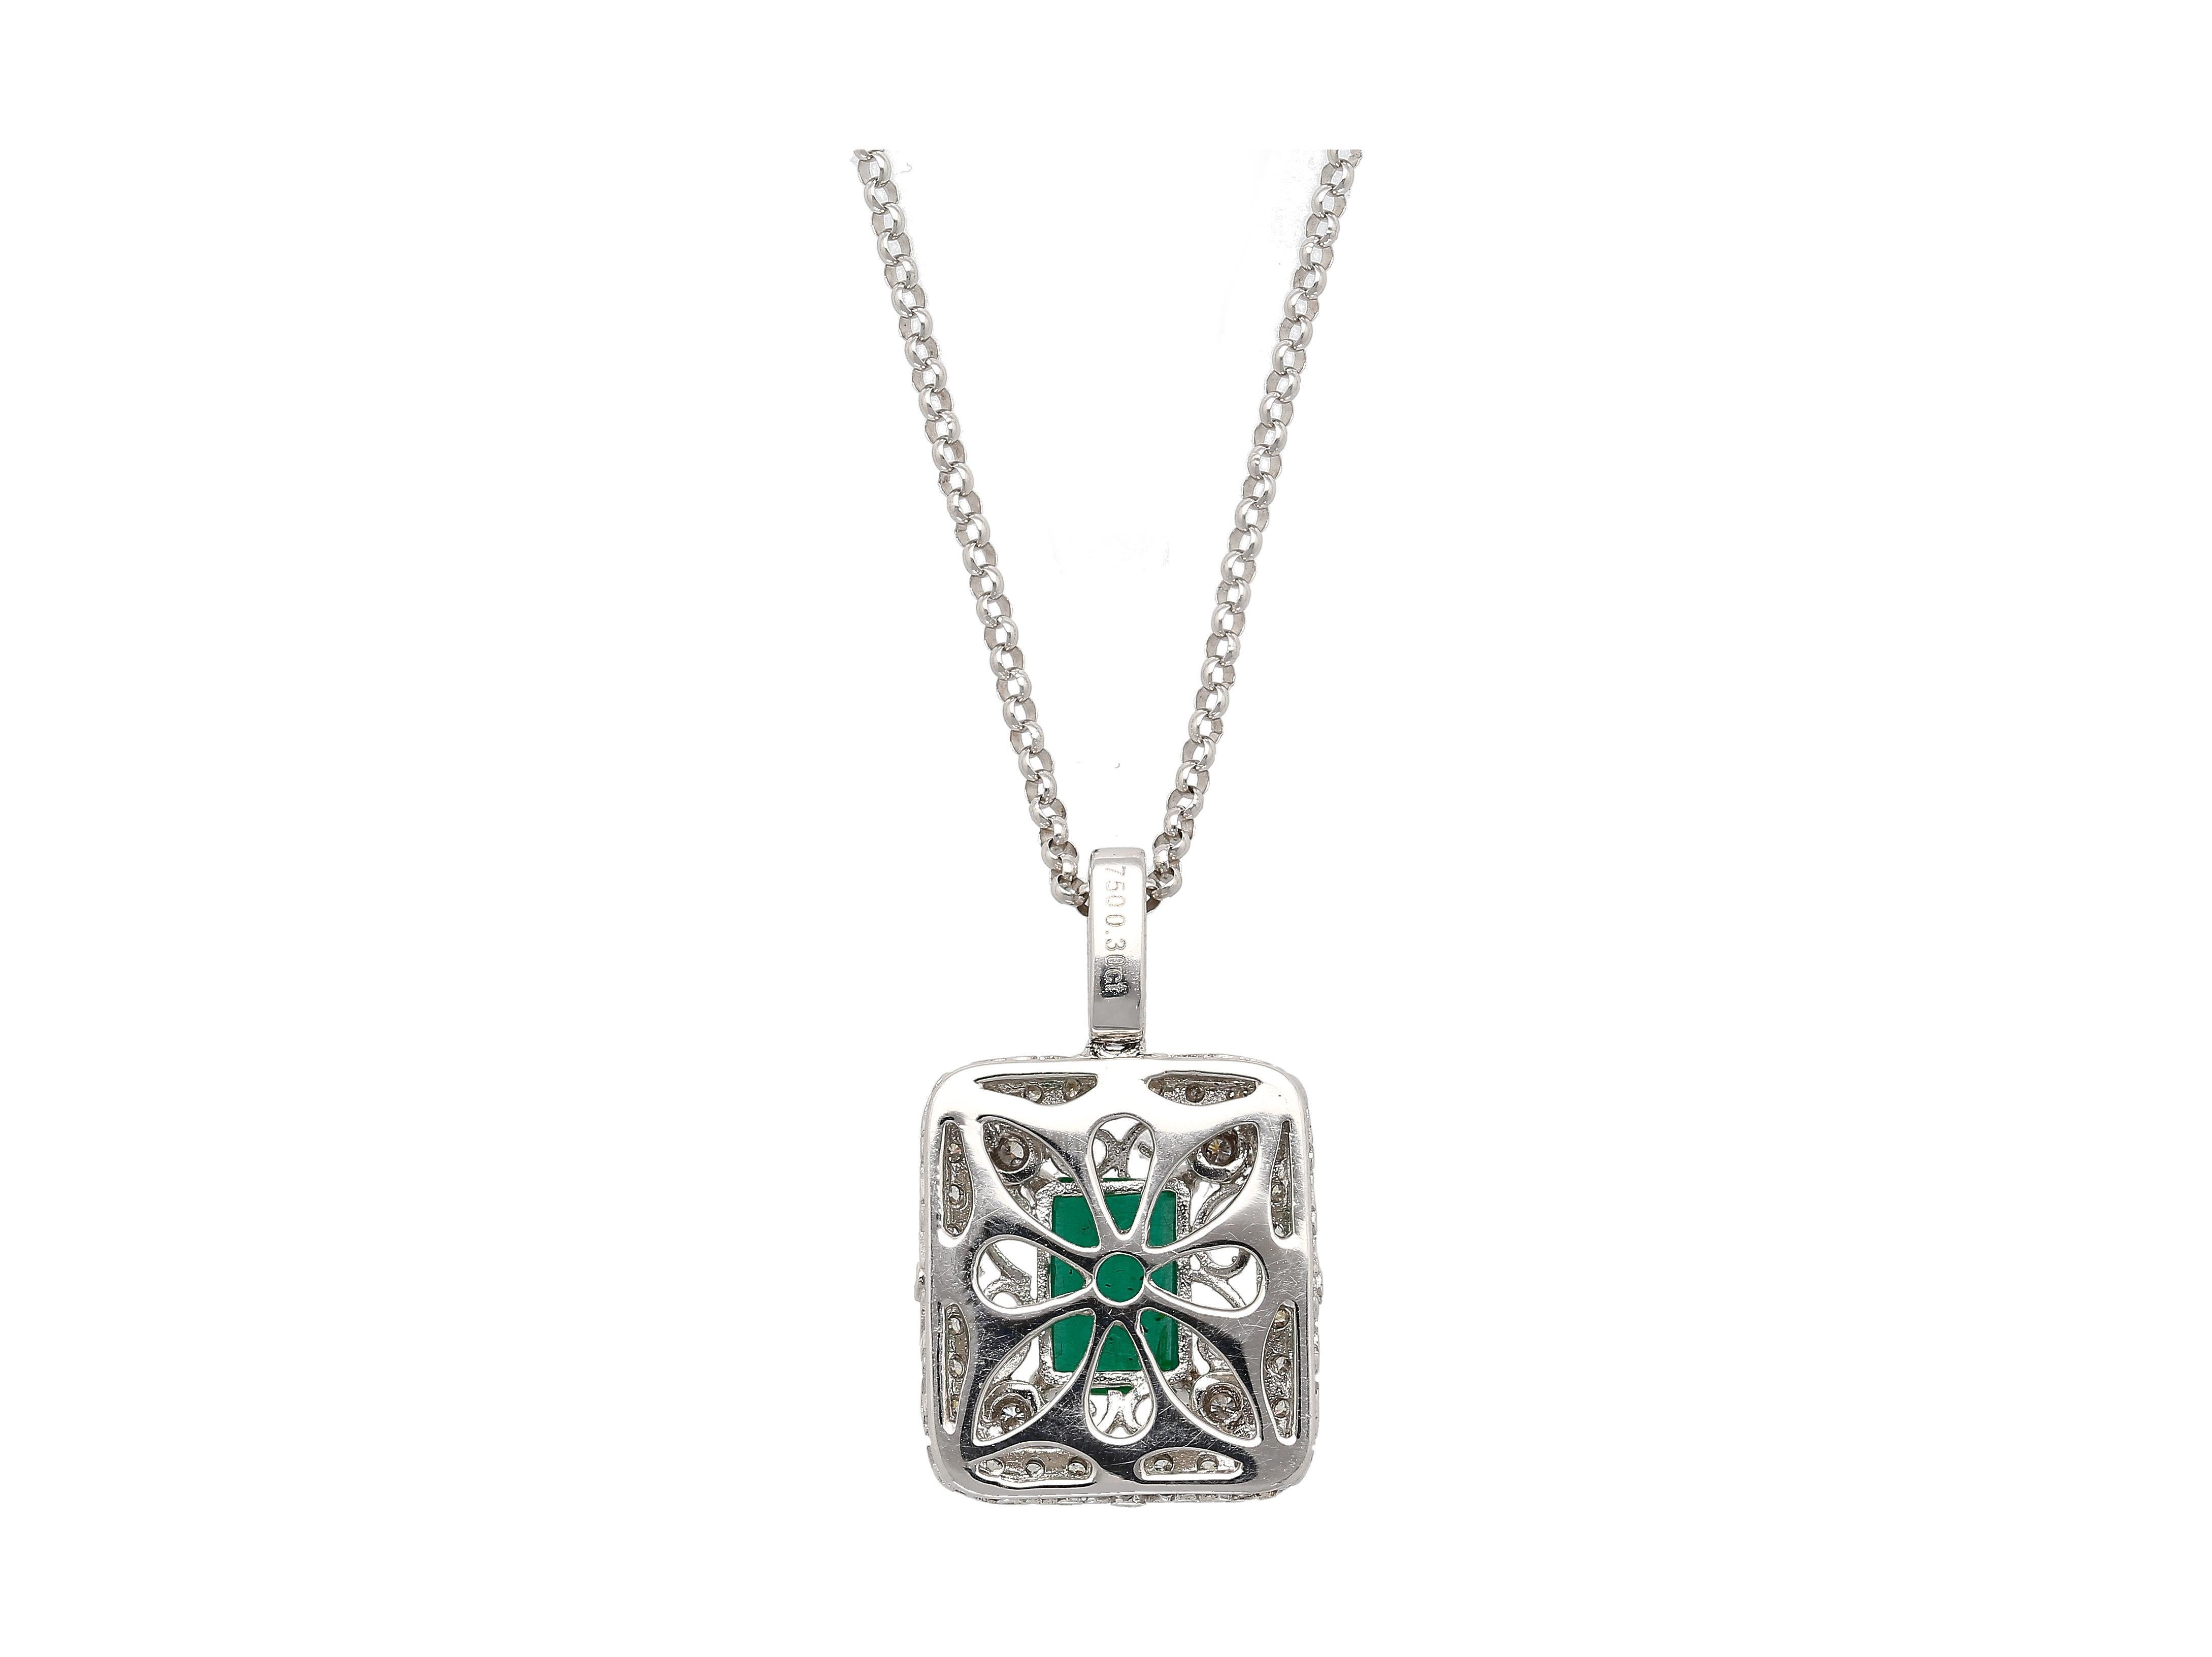 Women's GIA Certified 1.39 Carat Zambian Emerald and Diamond Floral Box Pendant Necklace For Sale